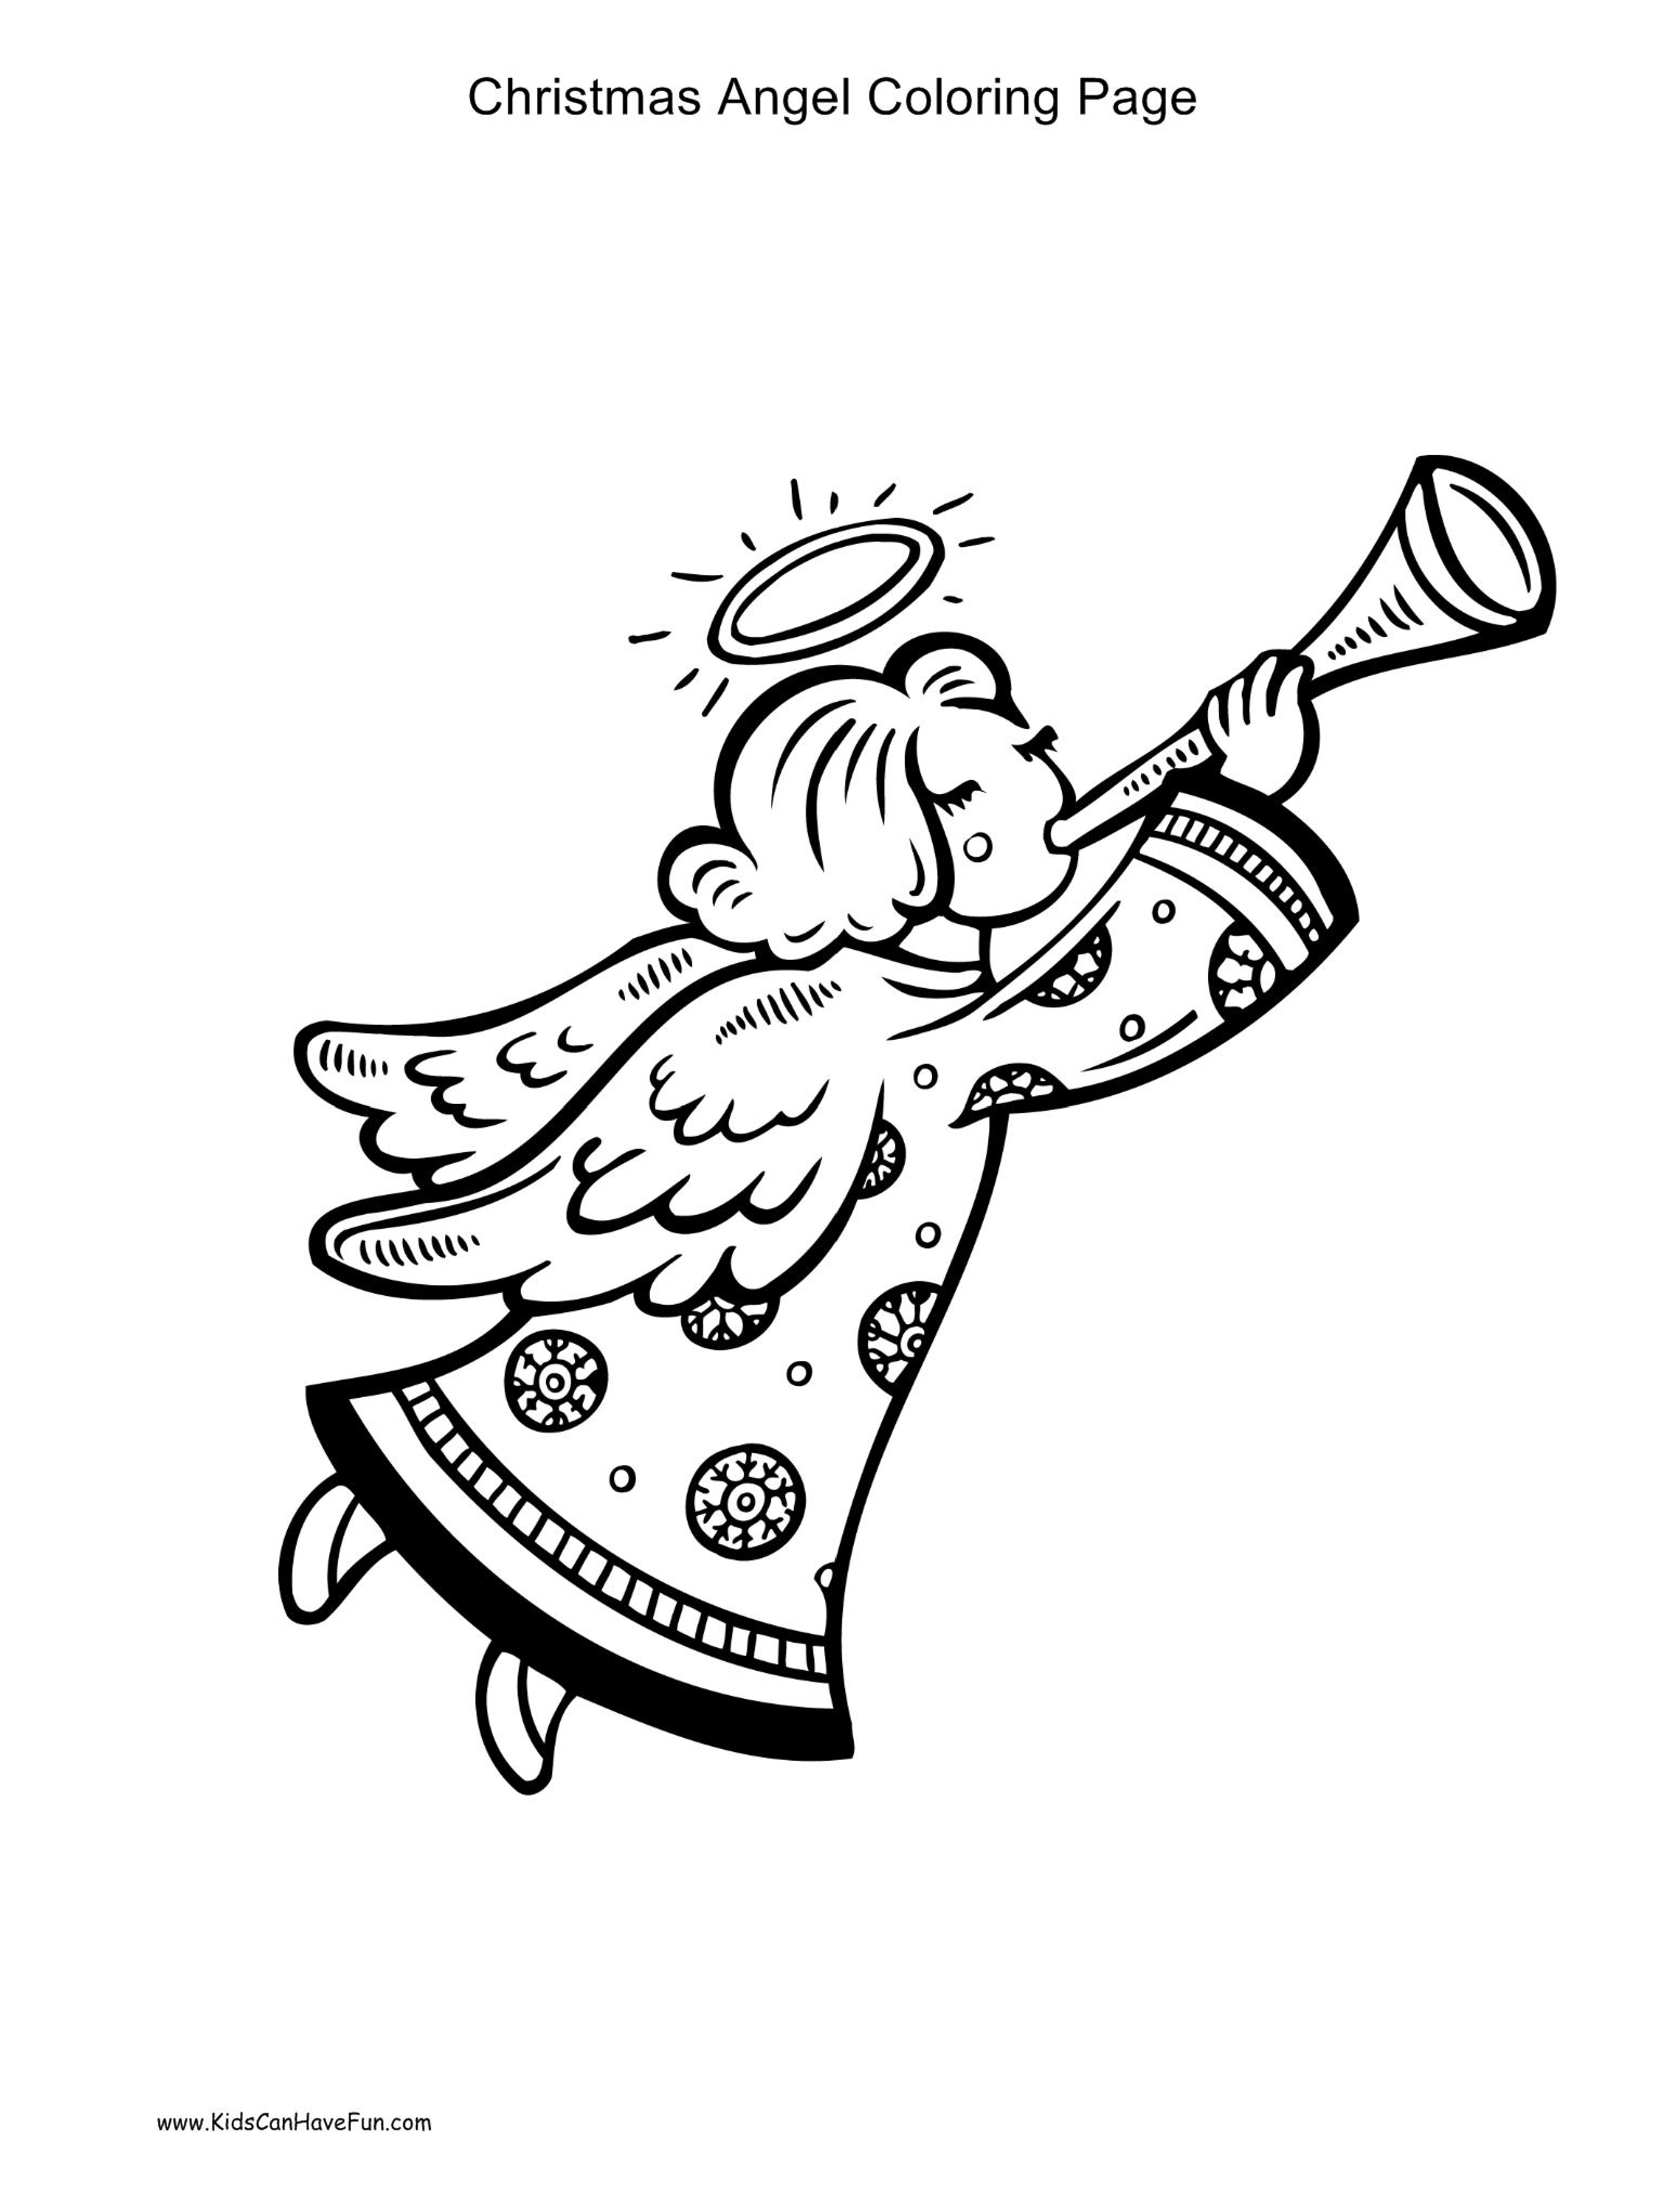 Christmas Angel blowing horn coloring page http://www.kidscanhavefun ...